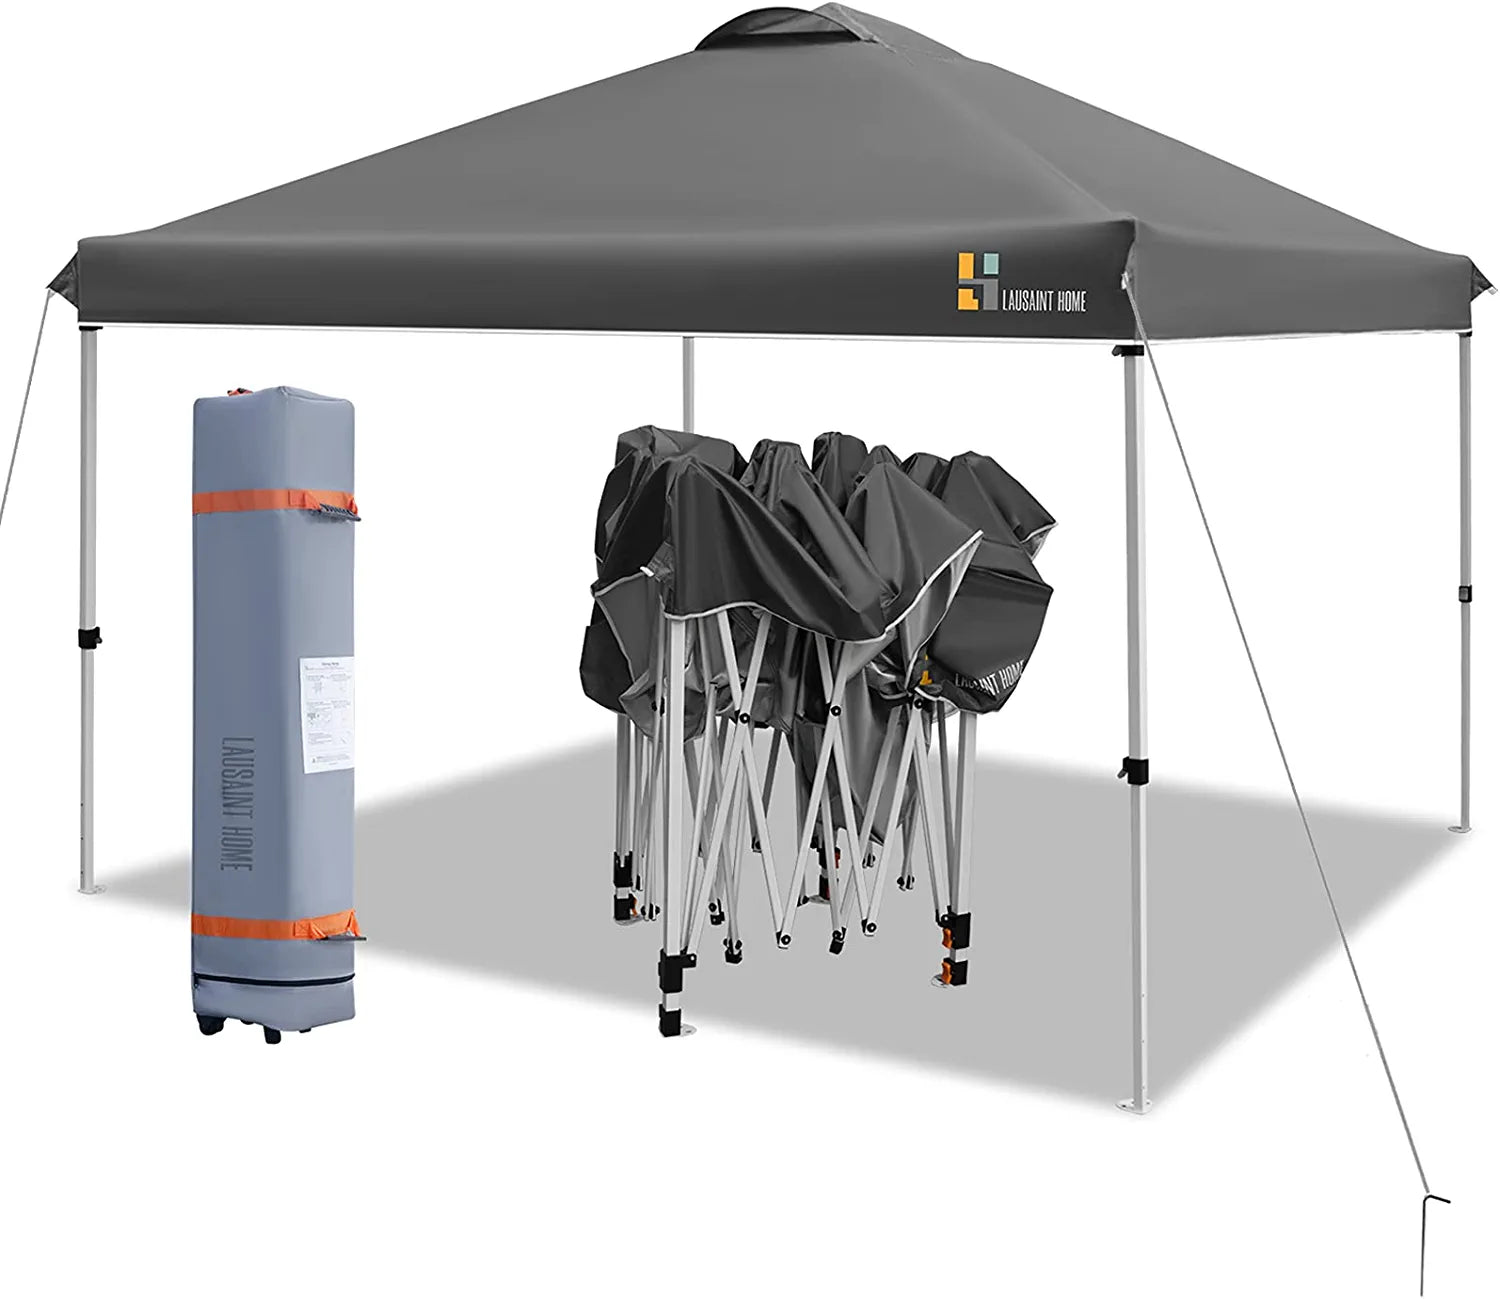 Pop Up Canopy 10x10 Commercial Instant Shelter Outdoor Canopy Tent(Gray)